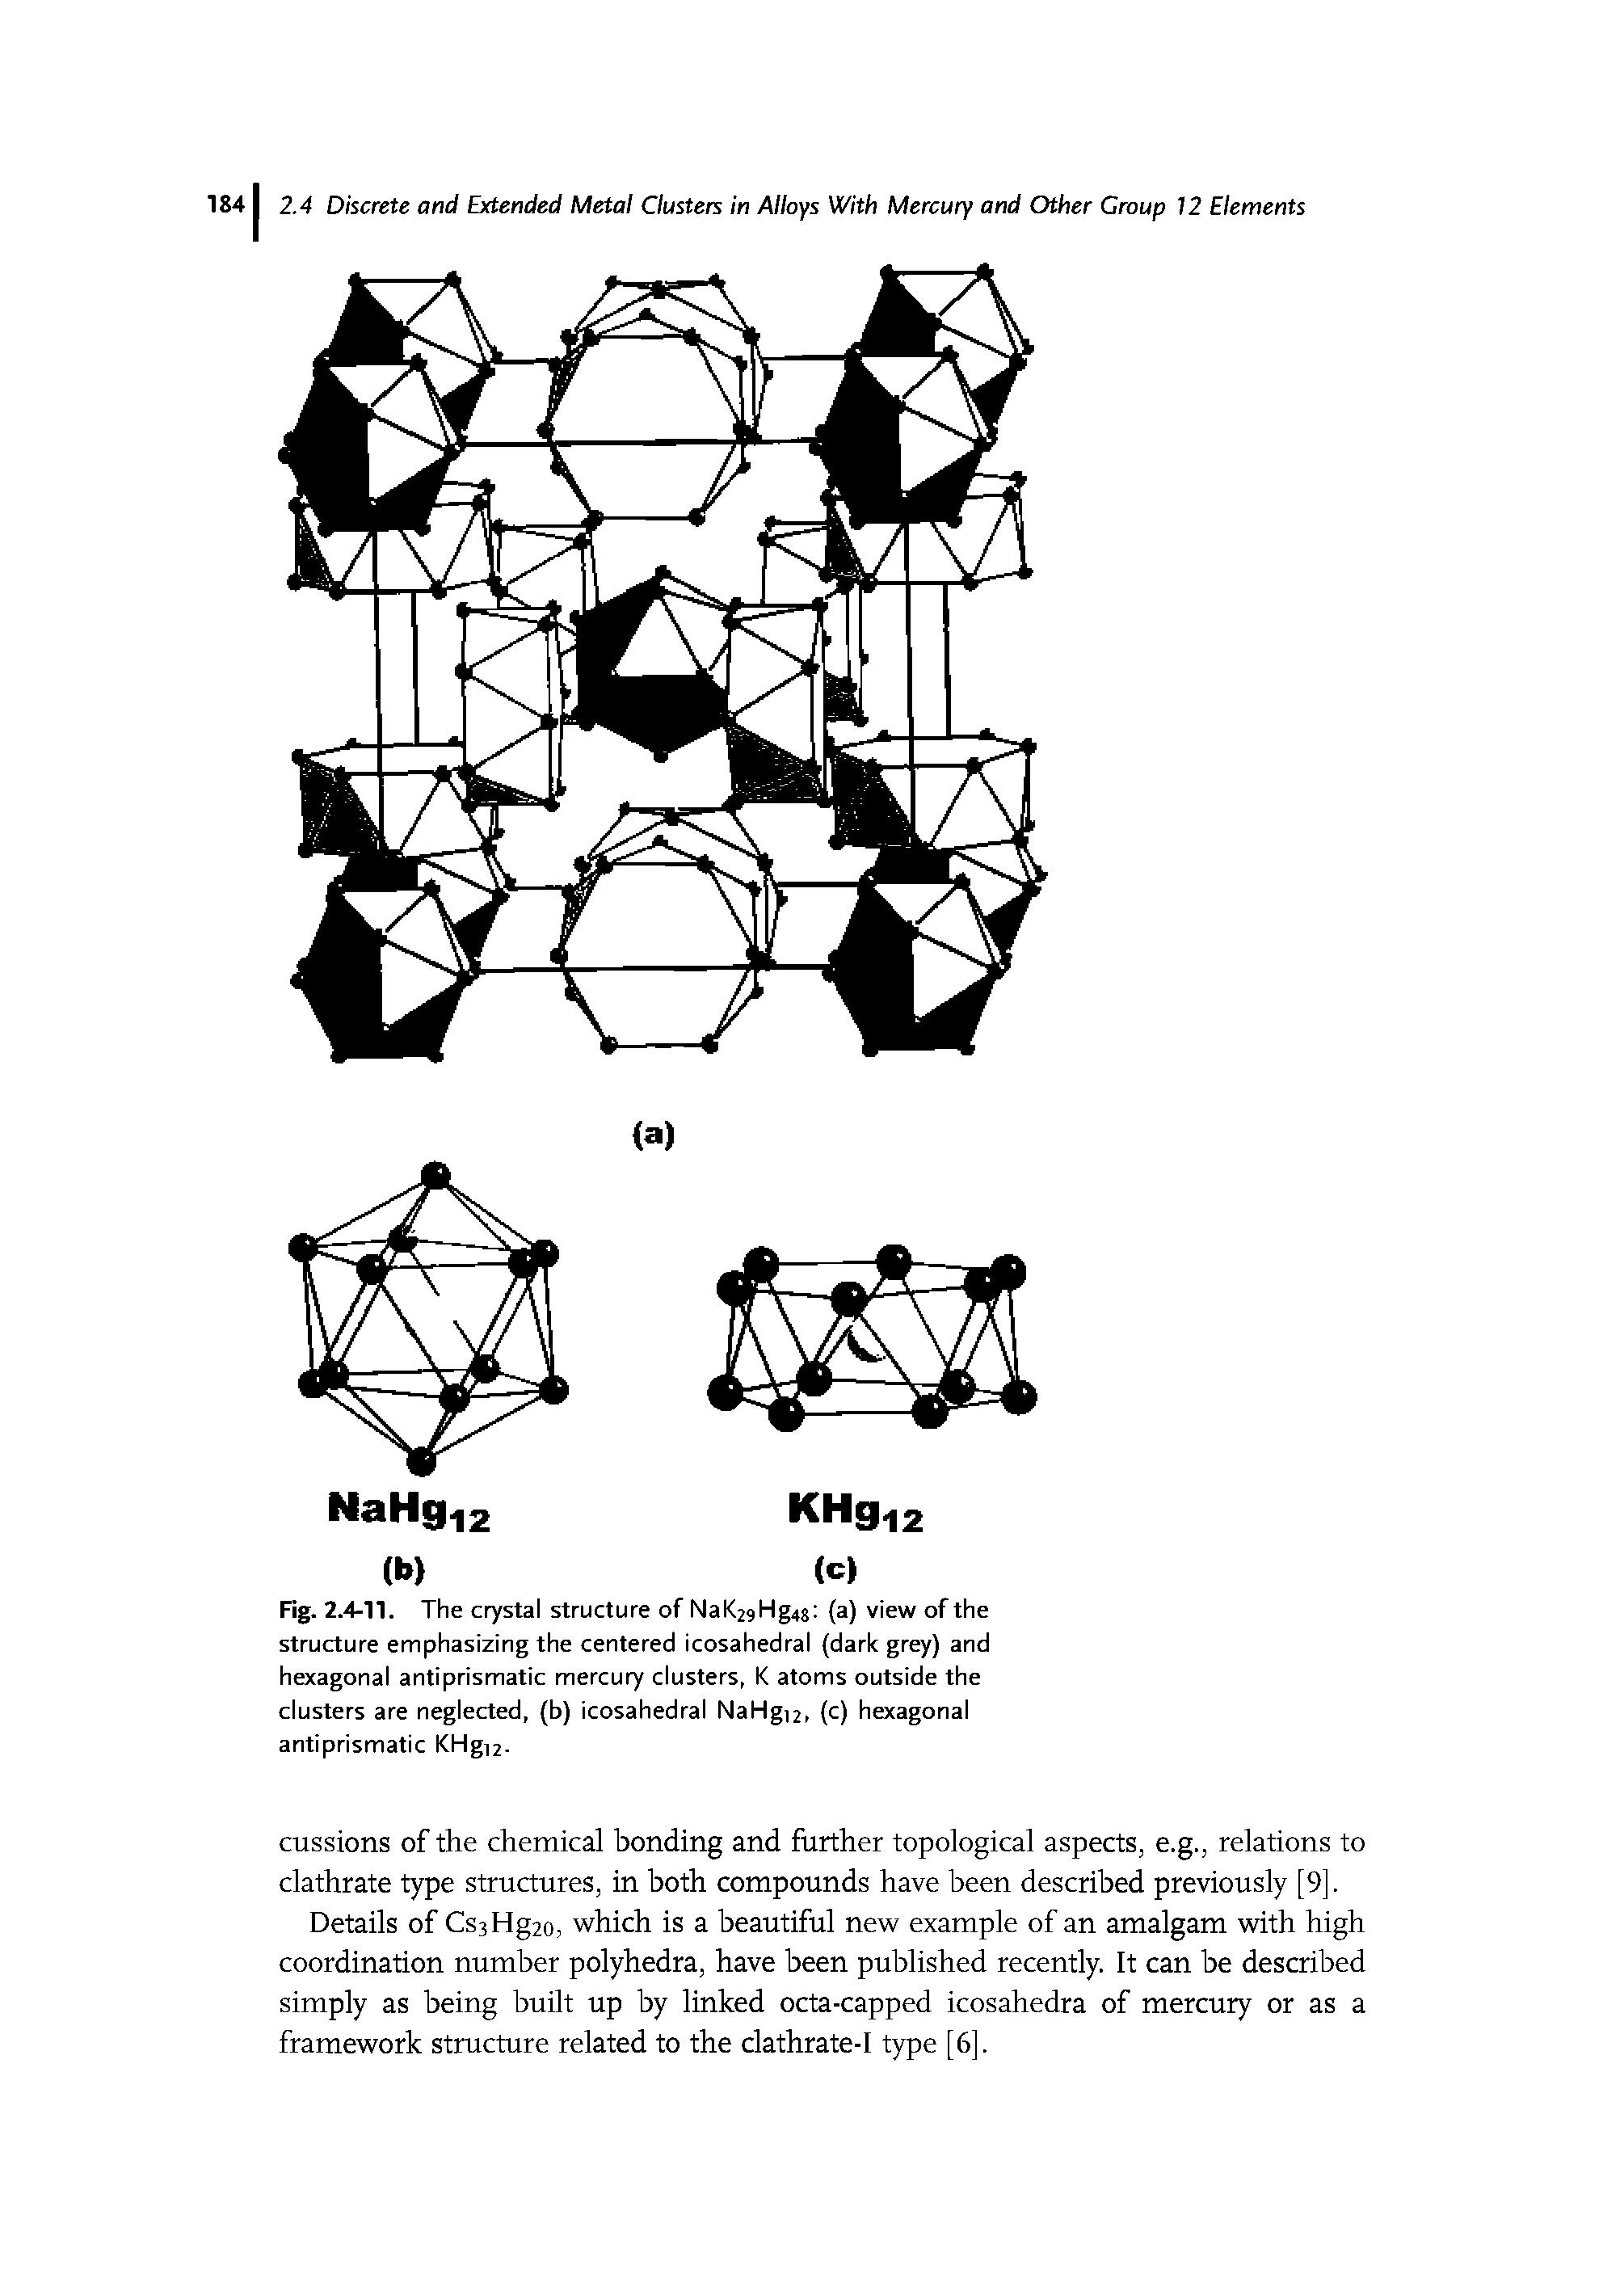 Fig. 2.4-11. The crystal structure of Nal Hg (a) view of the structure emphasizing the centered icosahedral (dark grey) and hexagonal antiprismatic mercury clusters, K atoms outside the clusters are neglected, (b) icosahedral NaHgi2, (c) hexagonal antiprismatic KHg12.